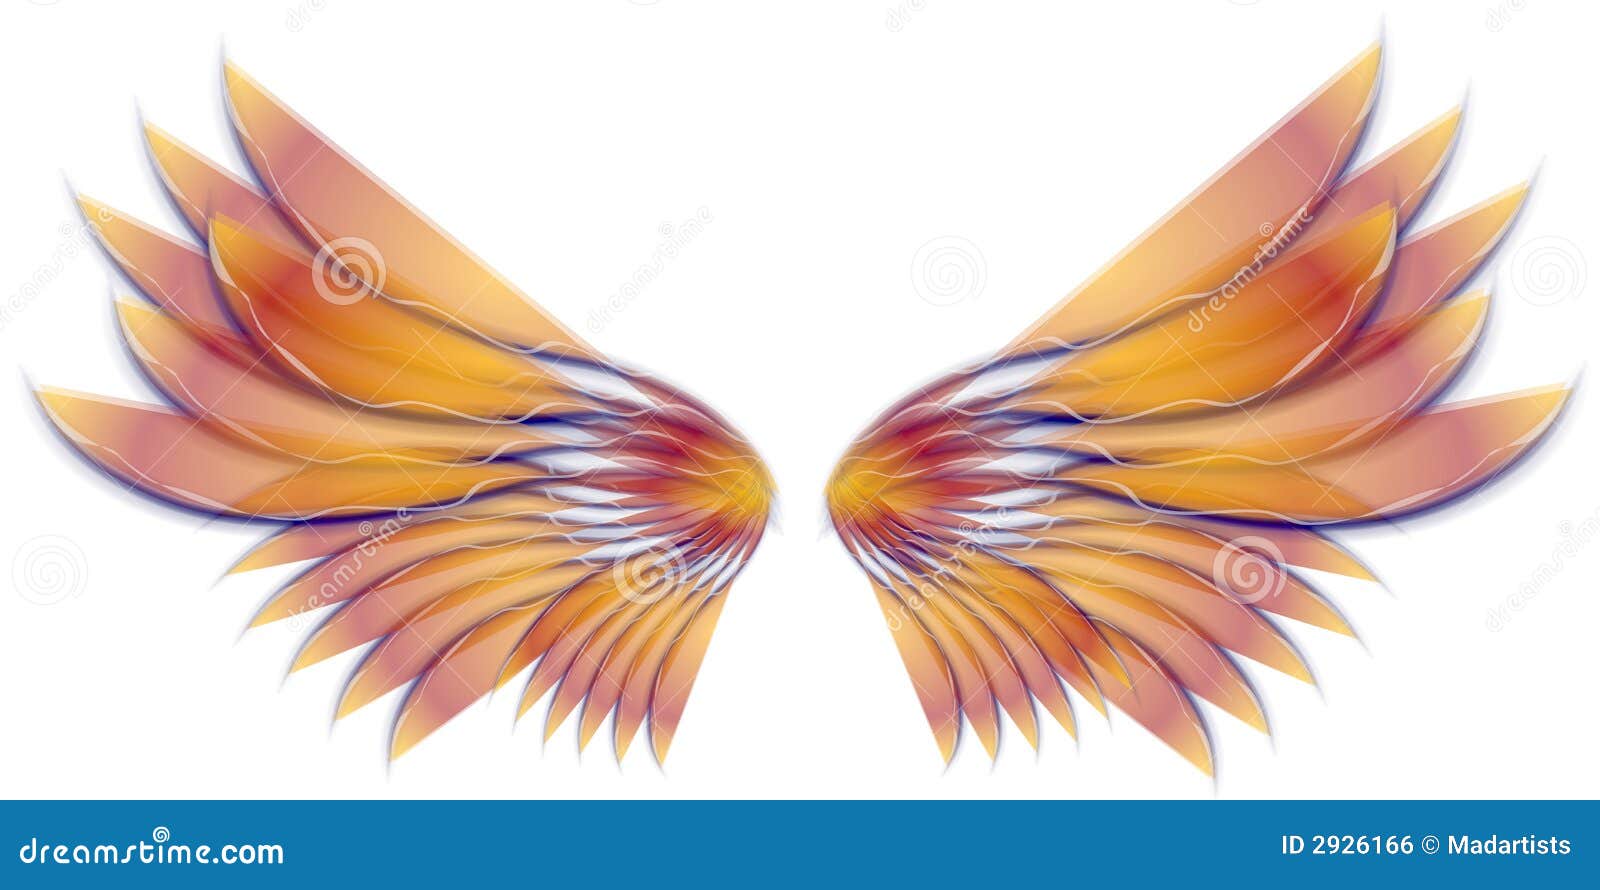 Angel Bird Or Fairy Wings Gold Stock Illustration Illustration Of Color Bird 2926166,Cooking Ribs On Gas Grill With Wood Chips